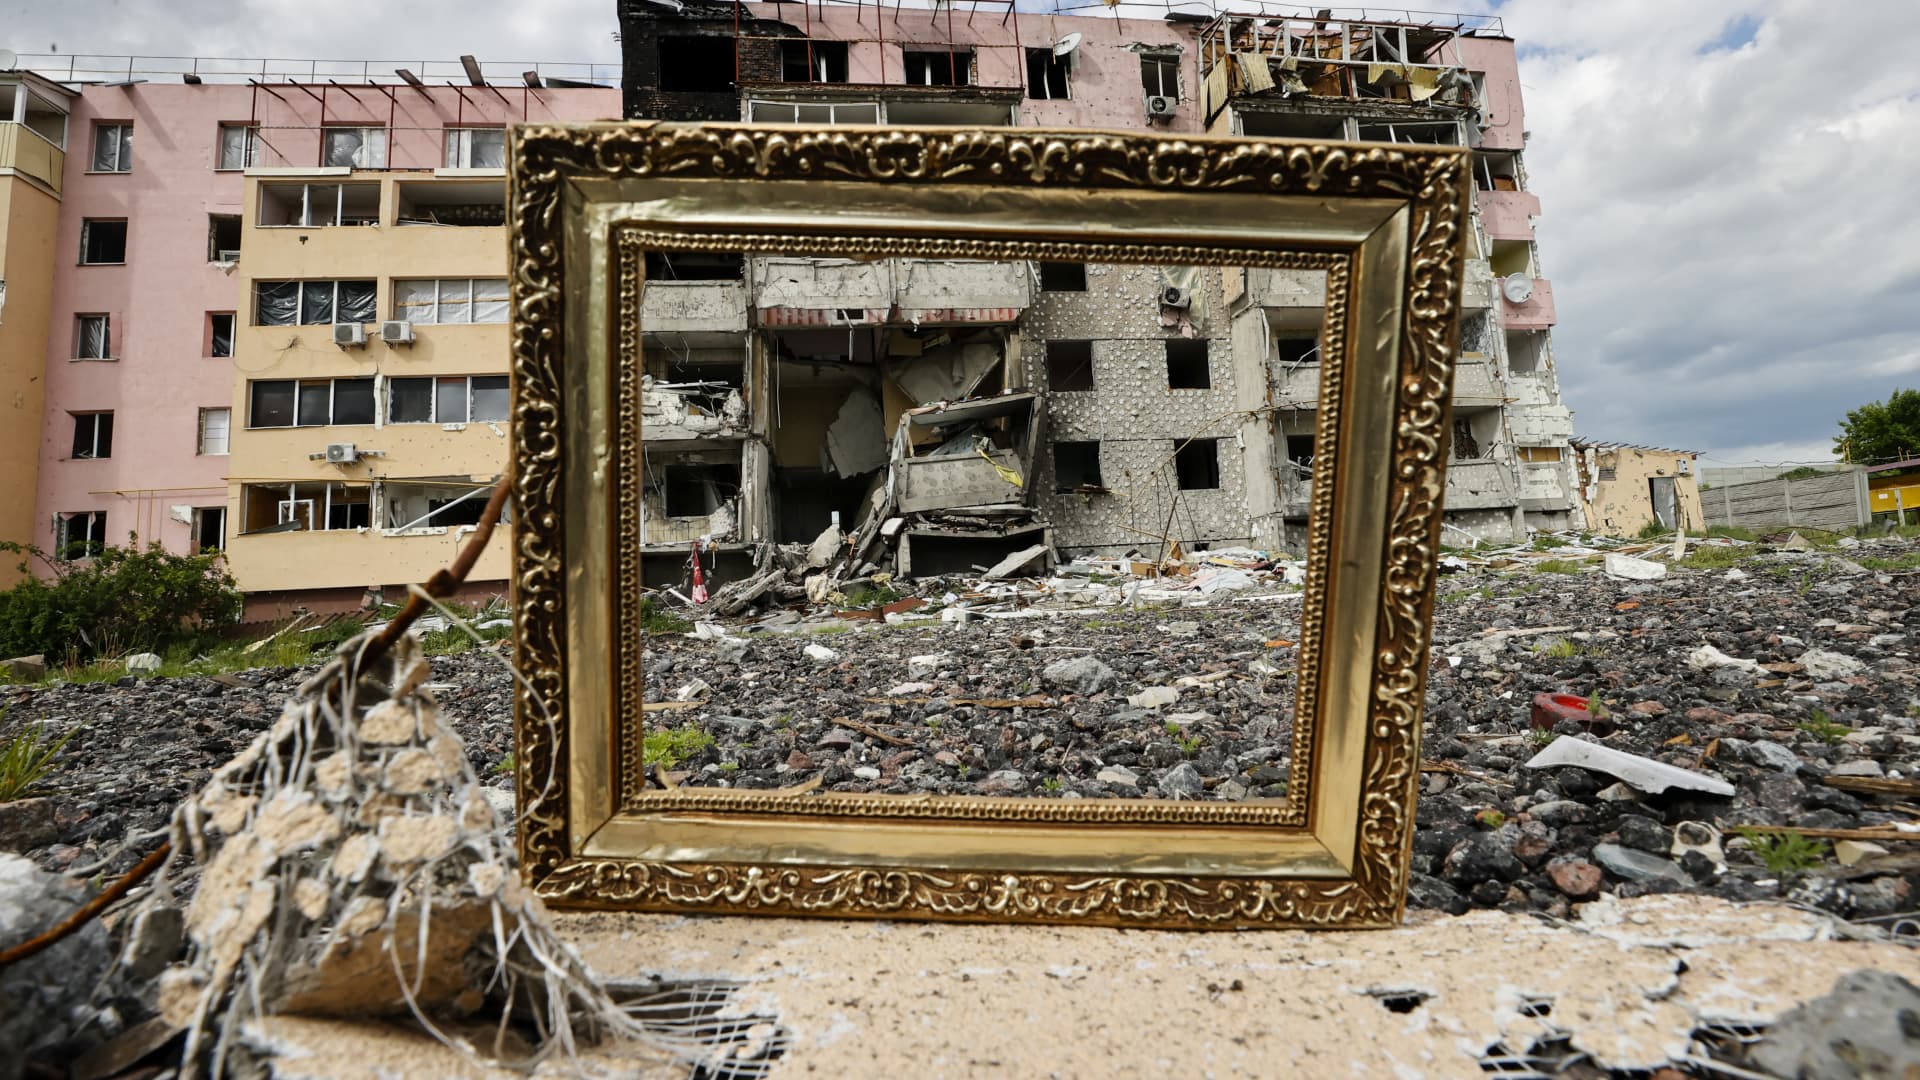 Destroyed buildings are seen after Russian attacks at Buzova village in Kyiv, Ukraine on May 26, 2022.